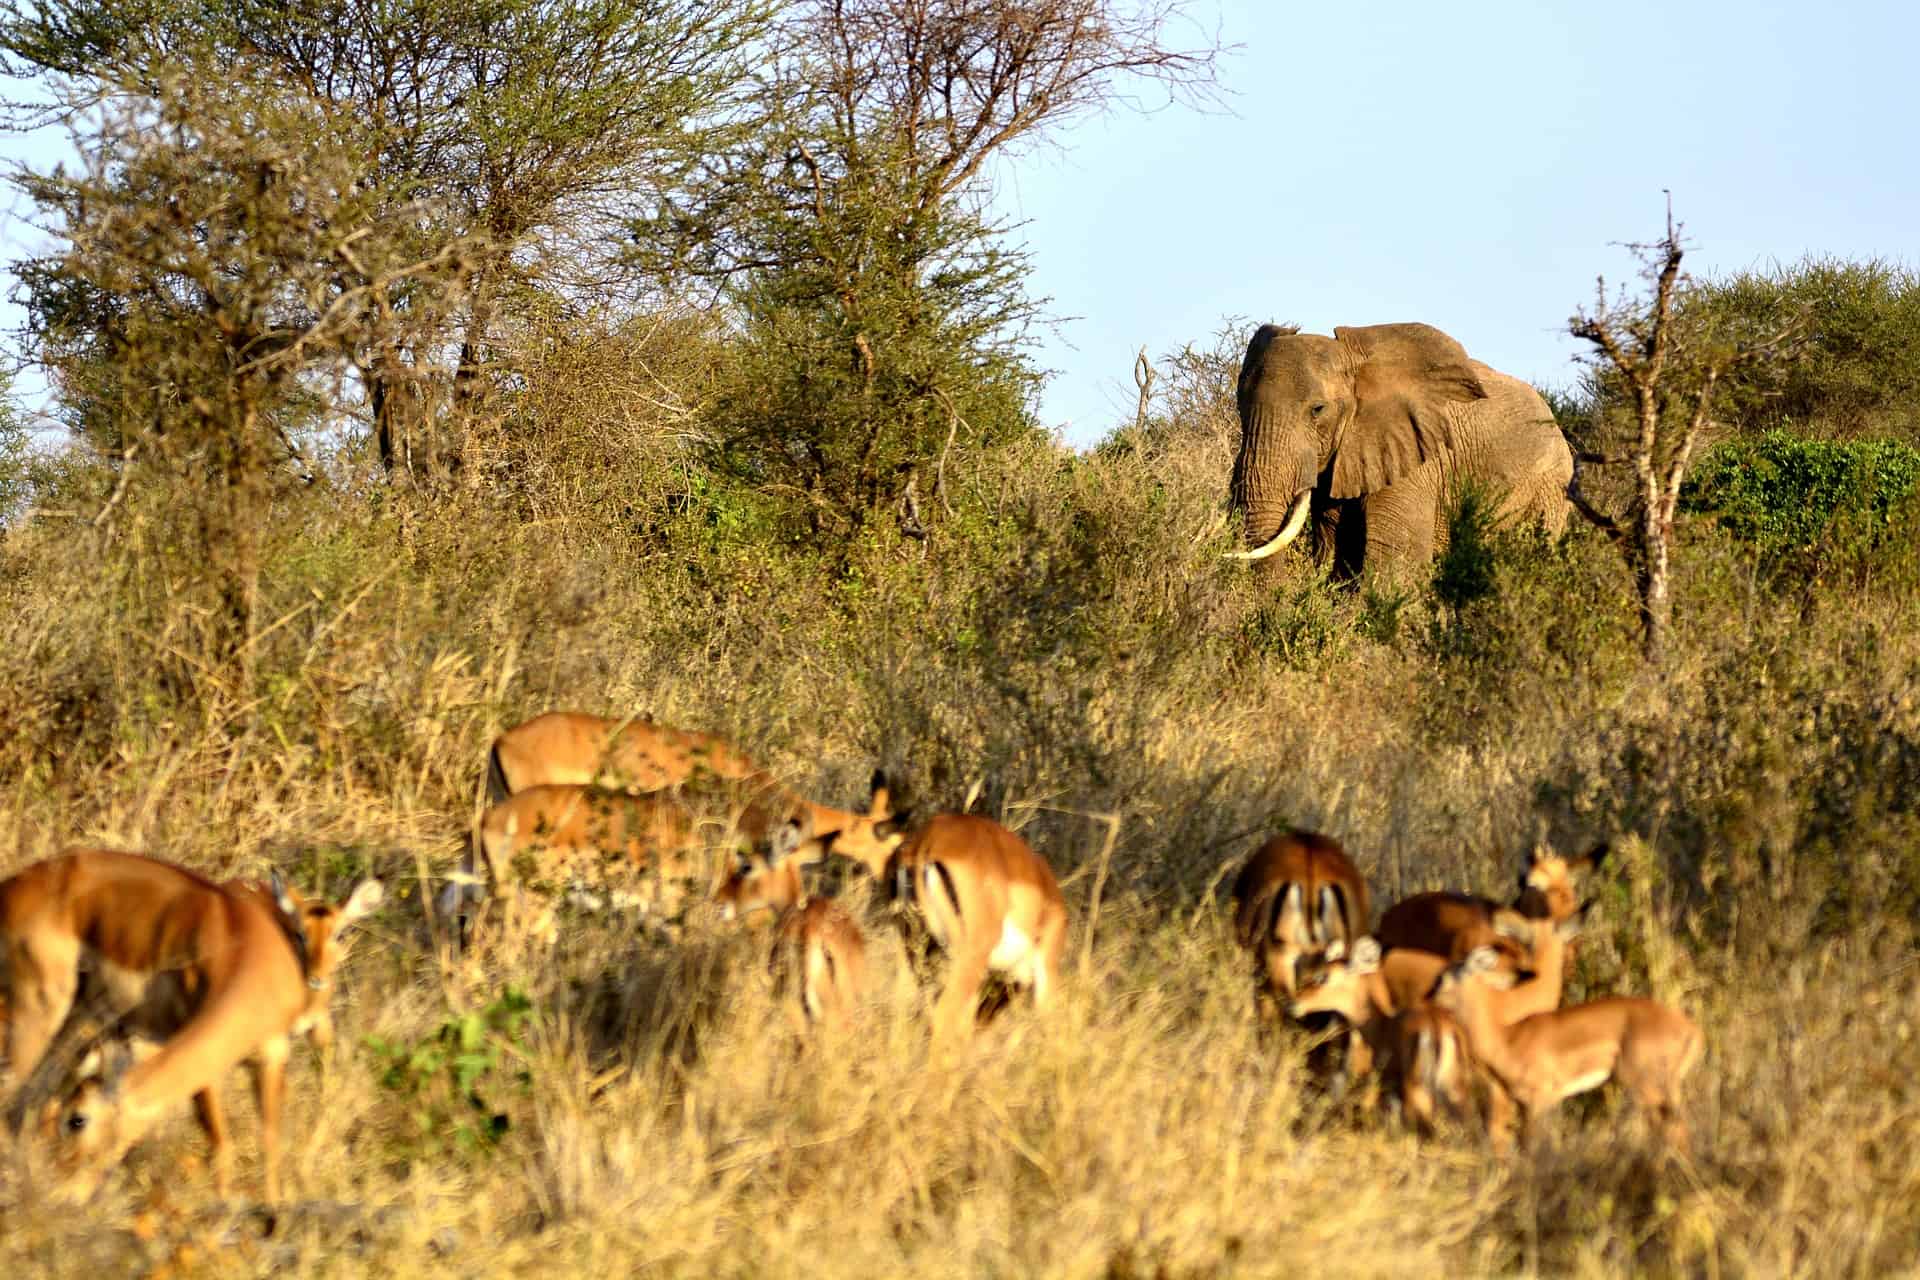 An elephant and Impalas in the grassland at dusk.